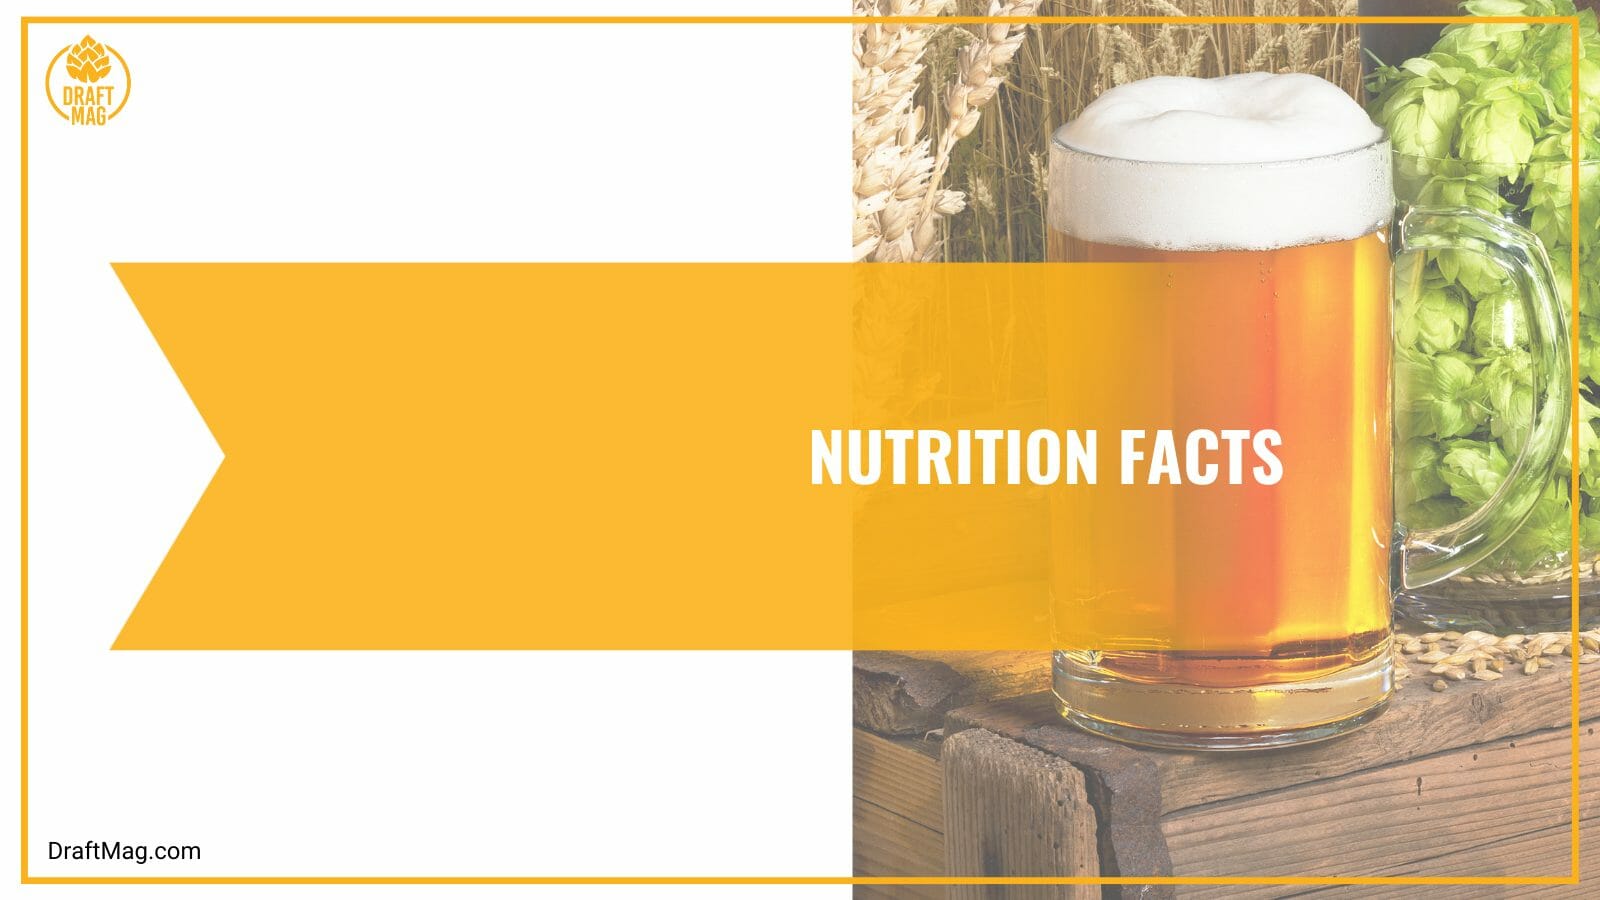 Nutrition Facts of Future Hop IPA